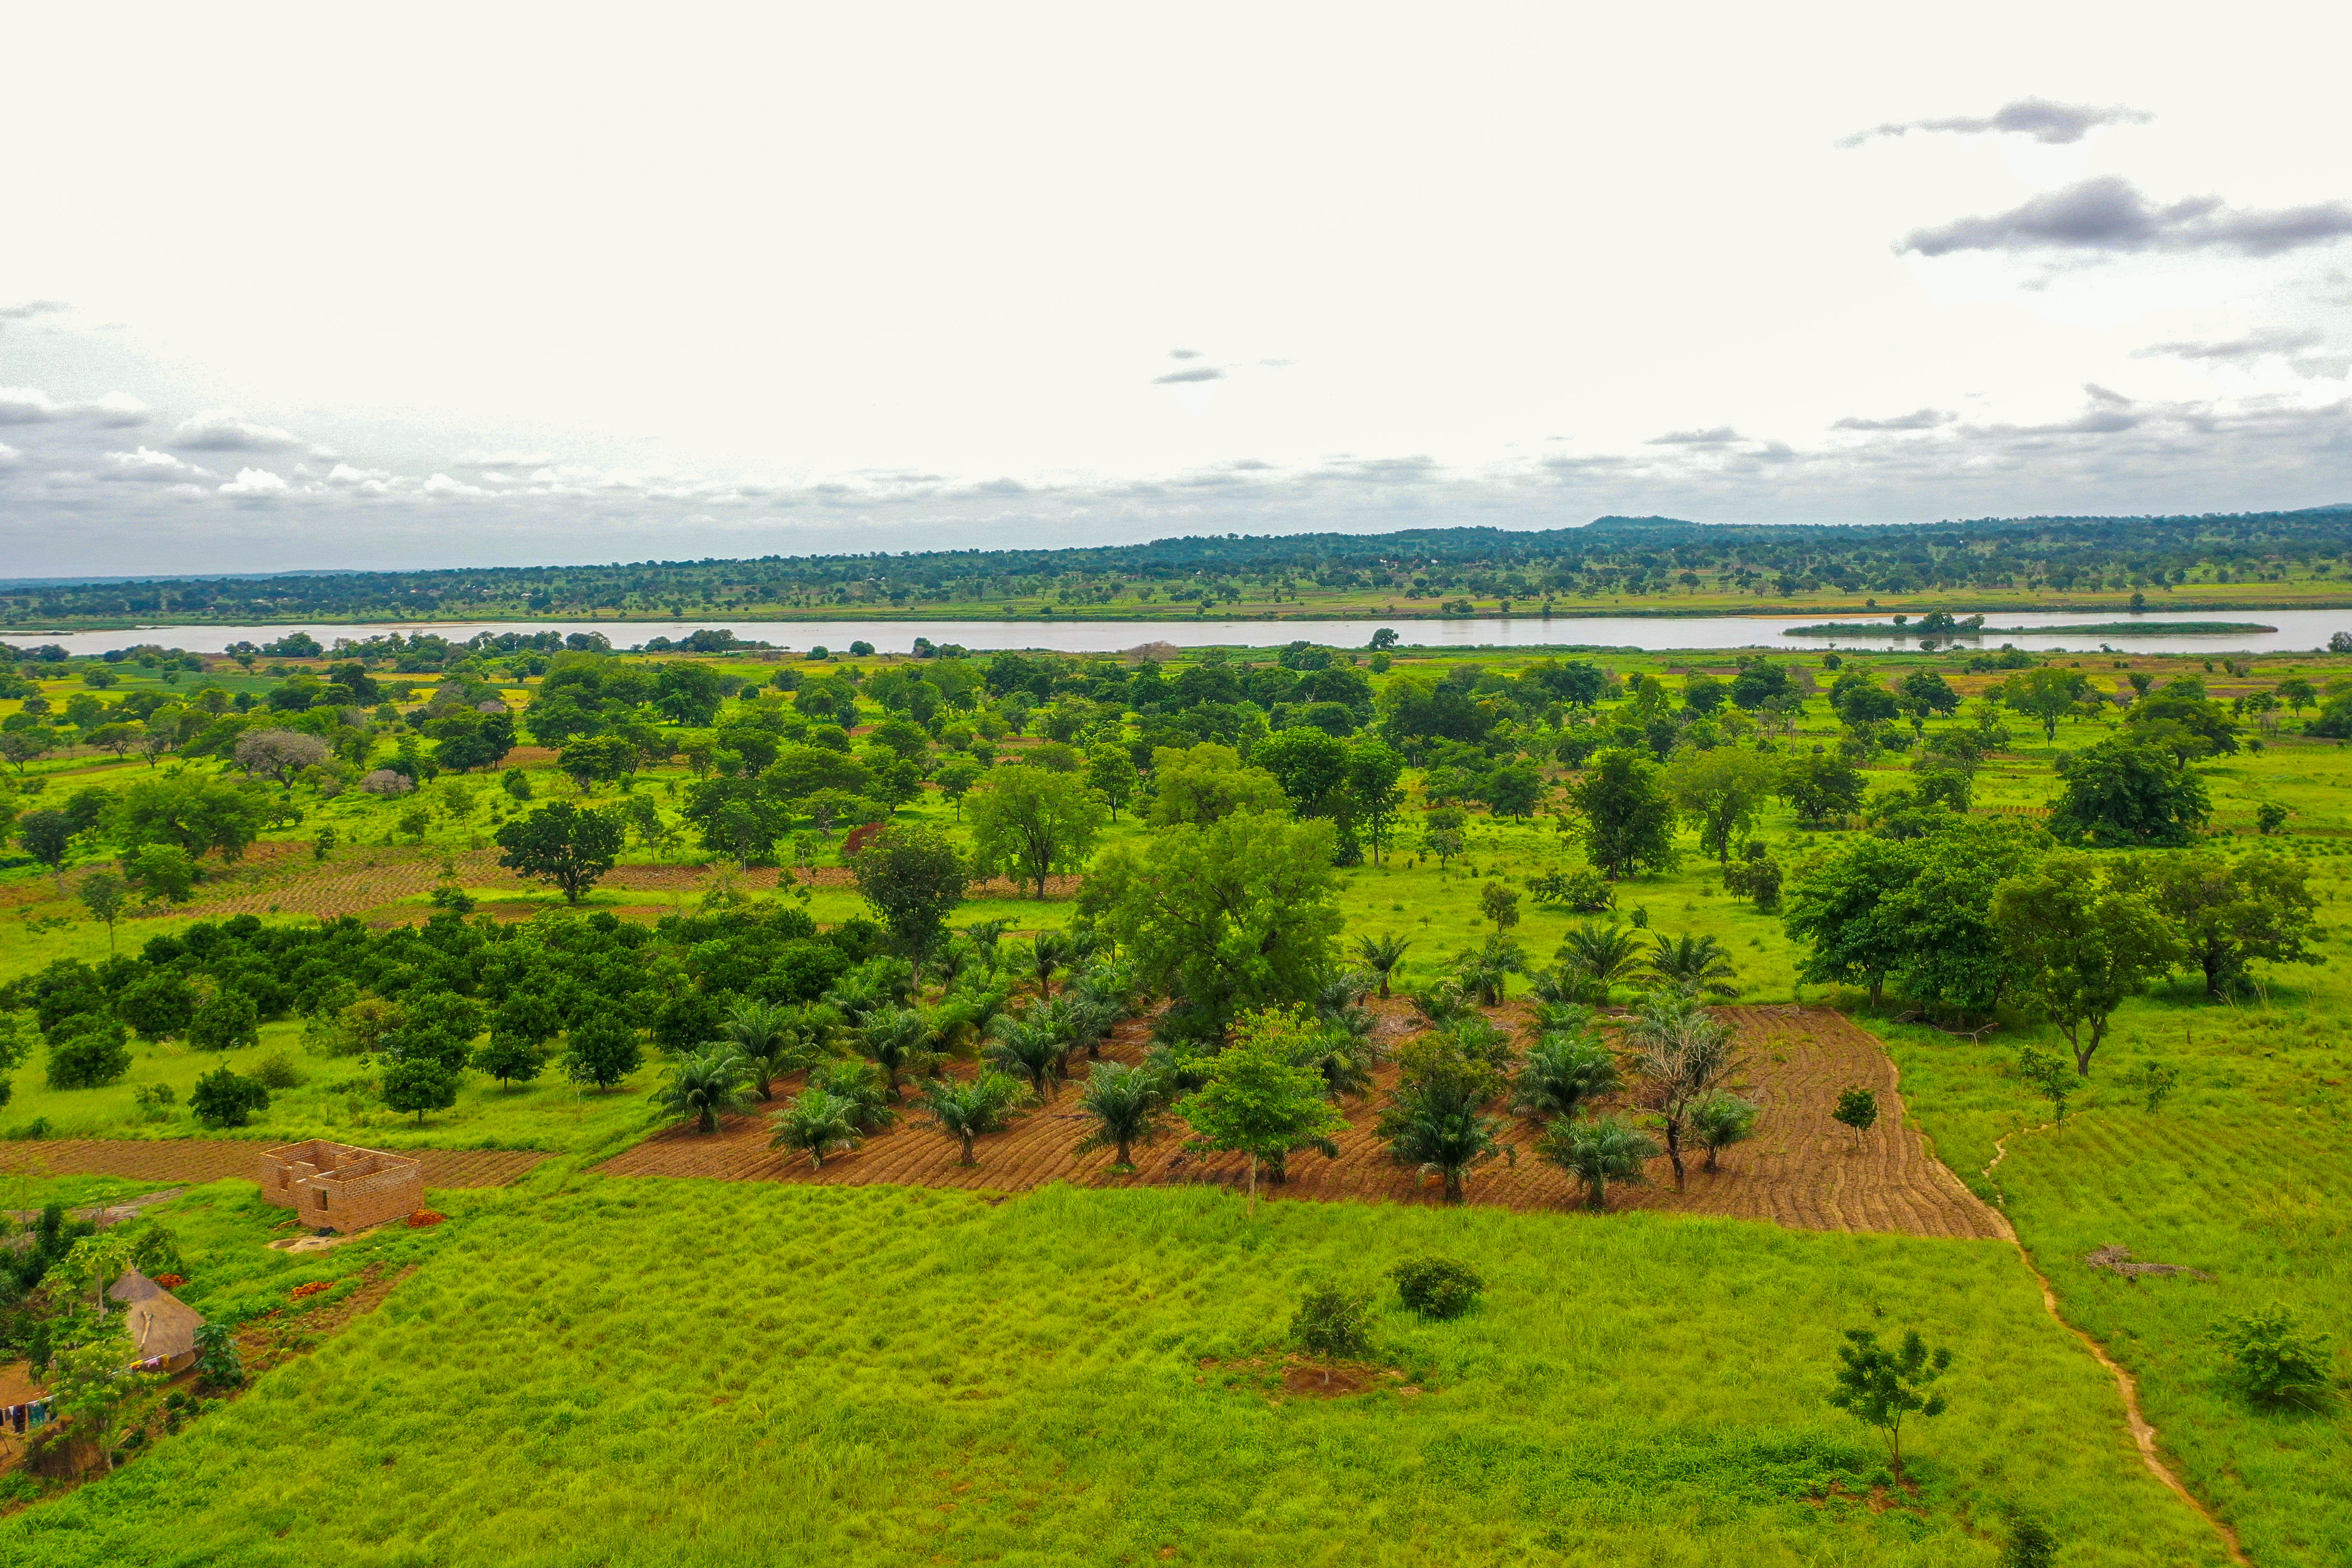 Agroforestry in Benue State.